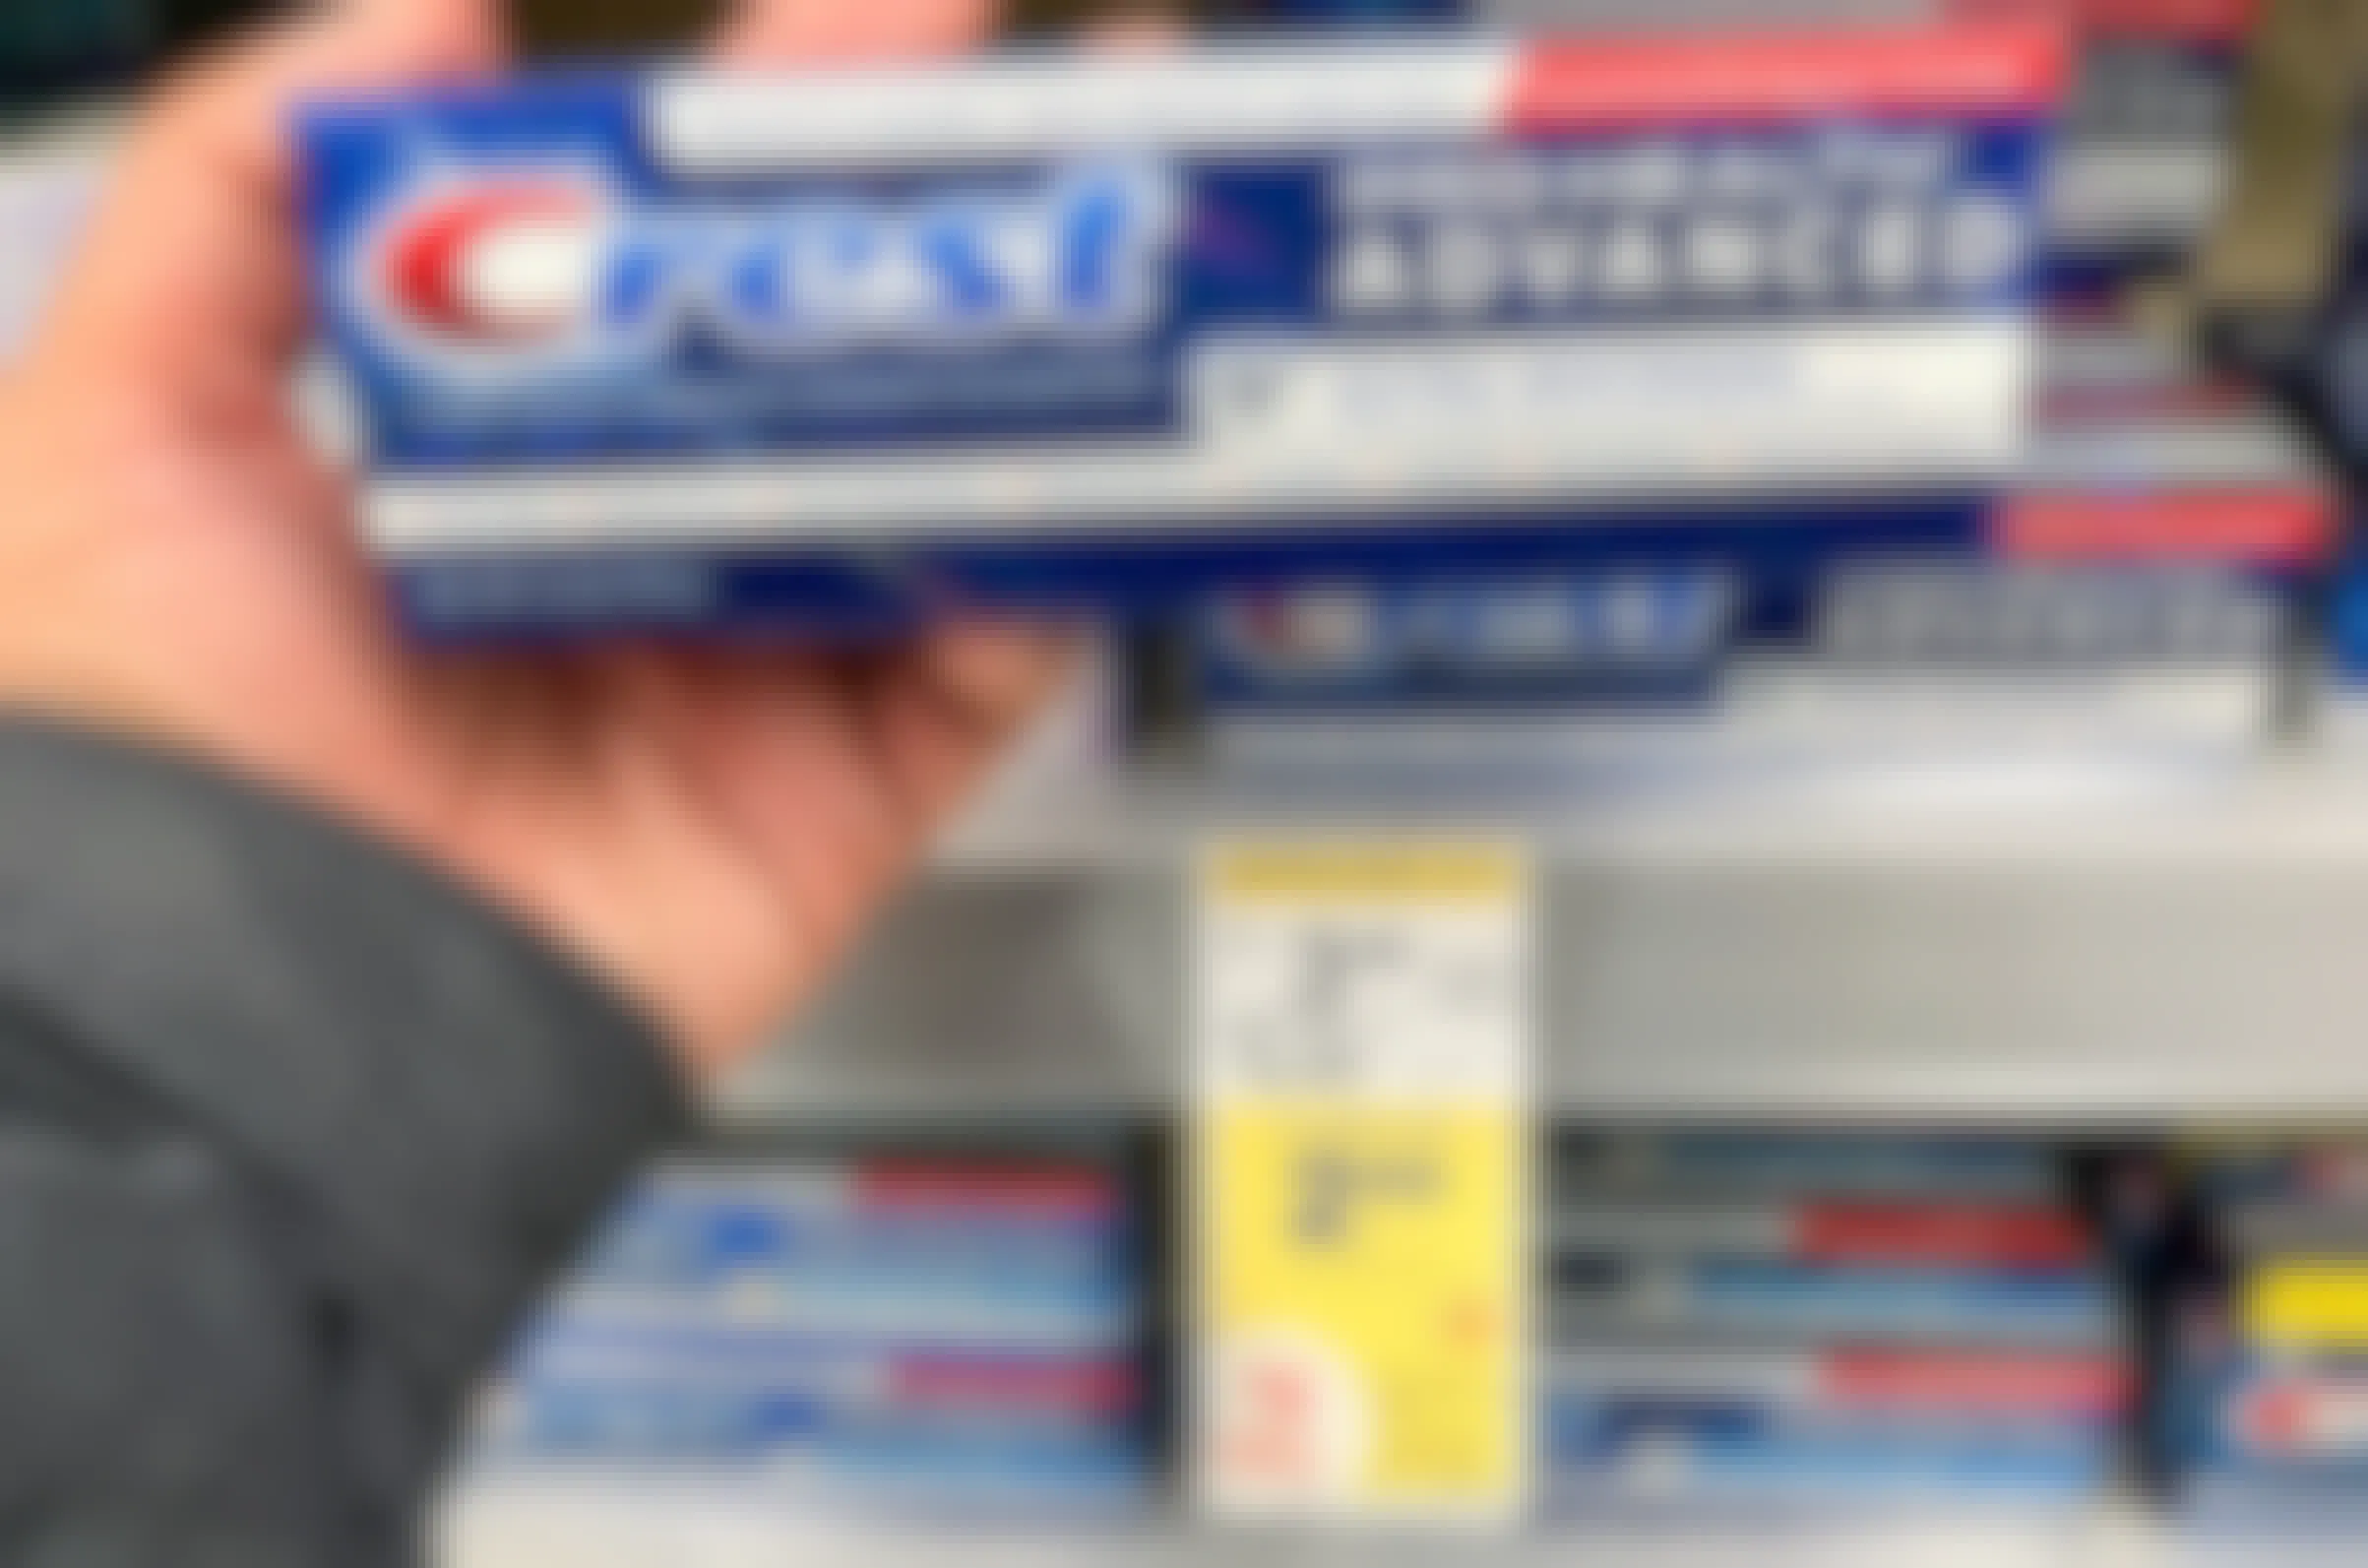 a hand holding a box of crest pro healthy advanced toothpaste at the drug store